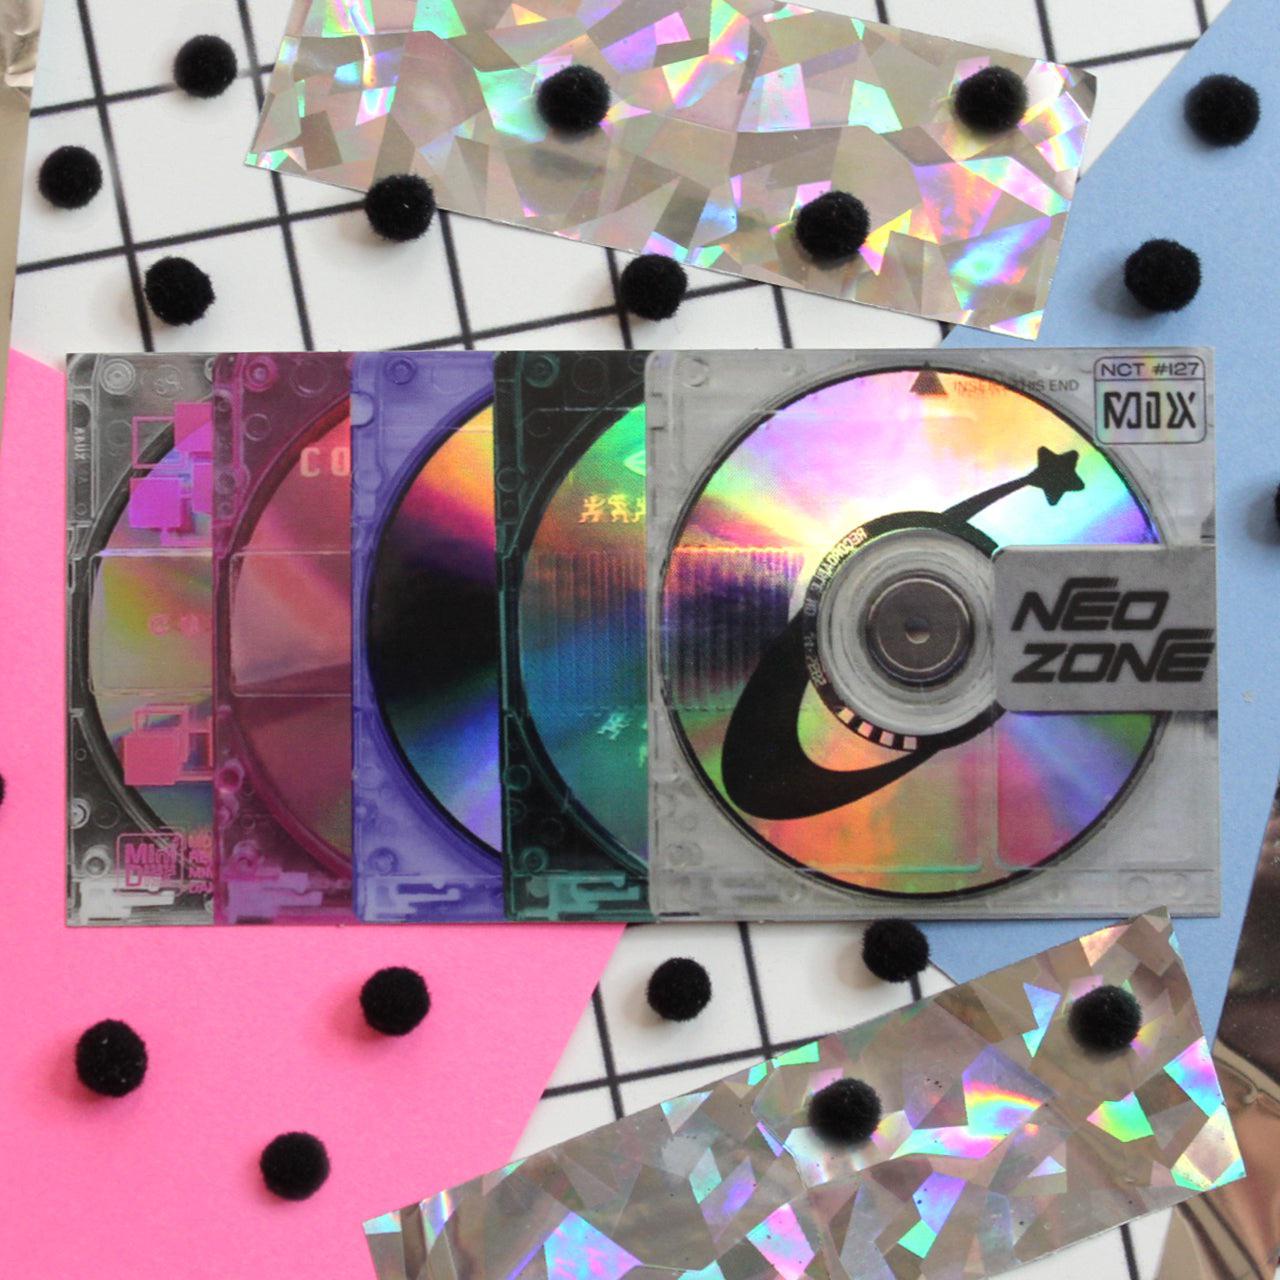 A collection of CDs in varying shades of pink, purple, blue and silver. - Internetcore